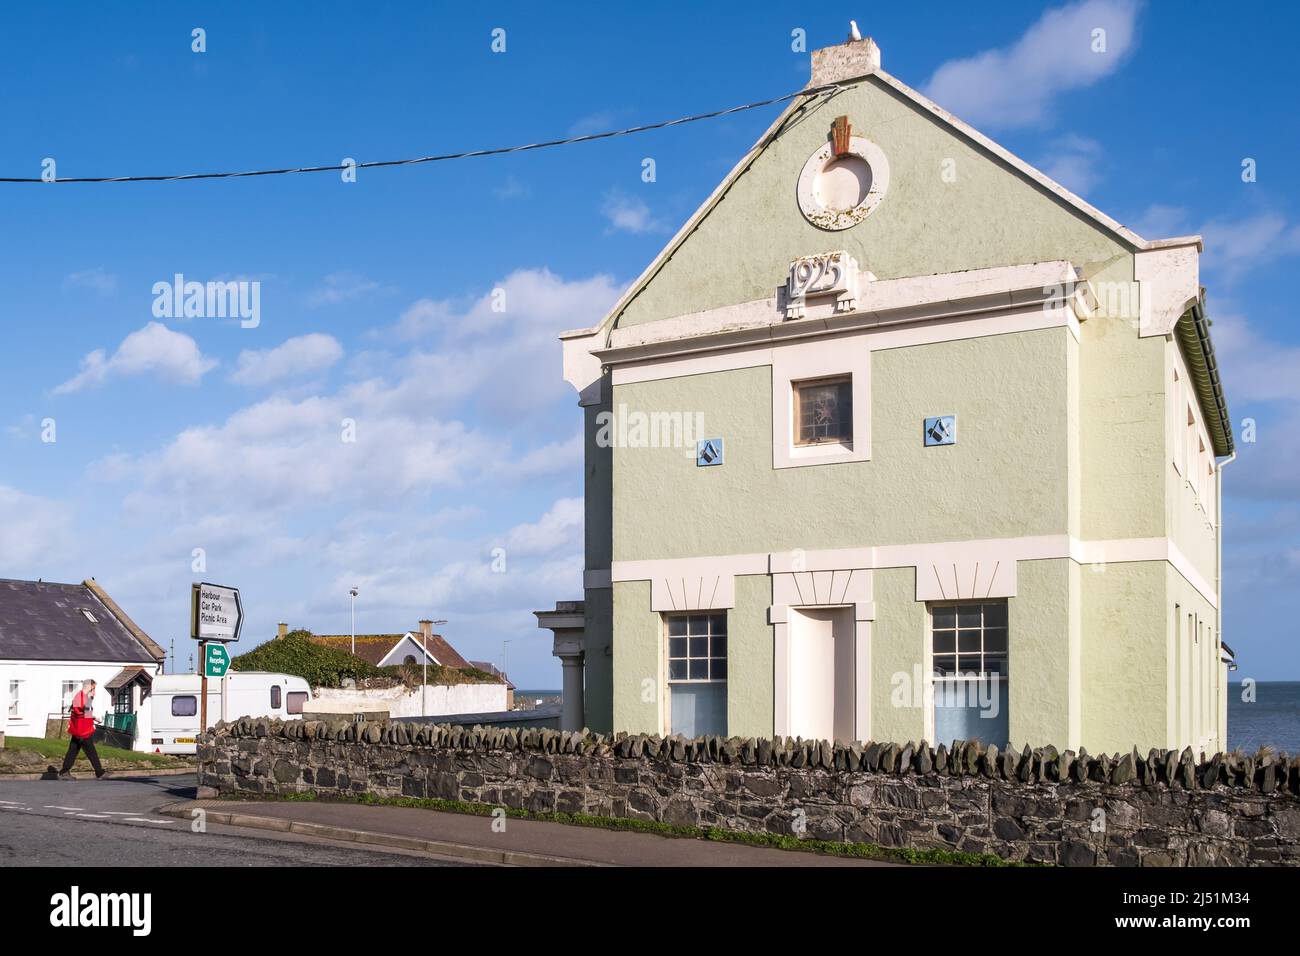 Masonic Hall in Ballywalter, County Down, Northern Ireland along the coast road at the entrance to Ballywalter harbour. Stock Photo